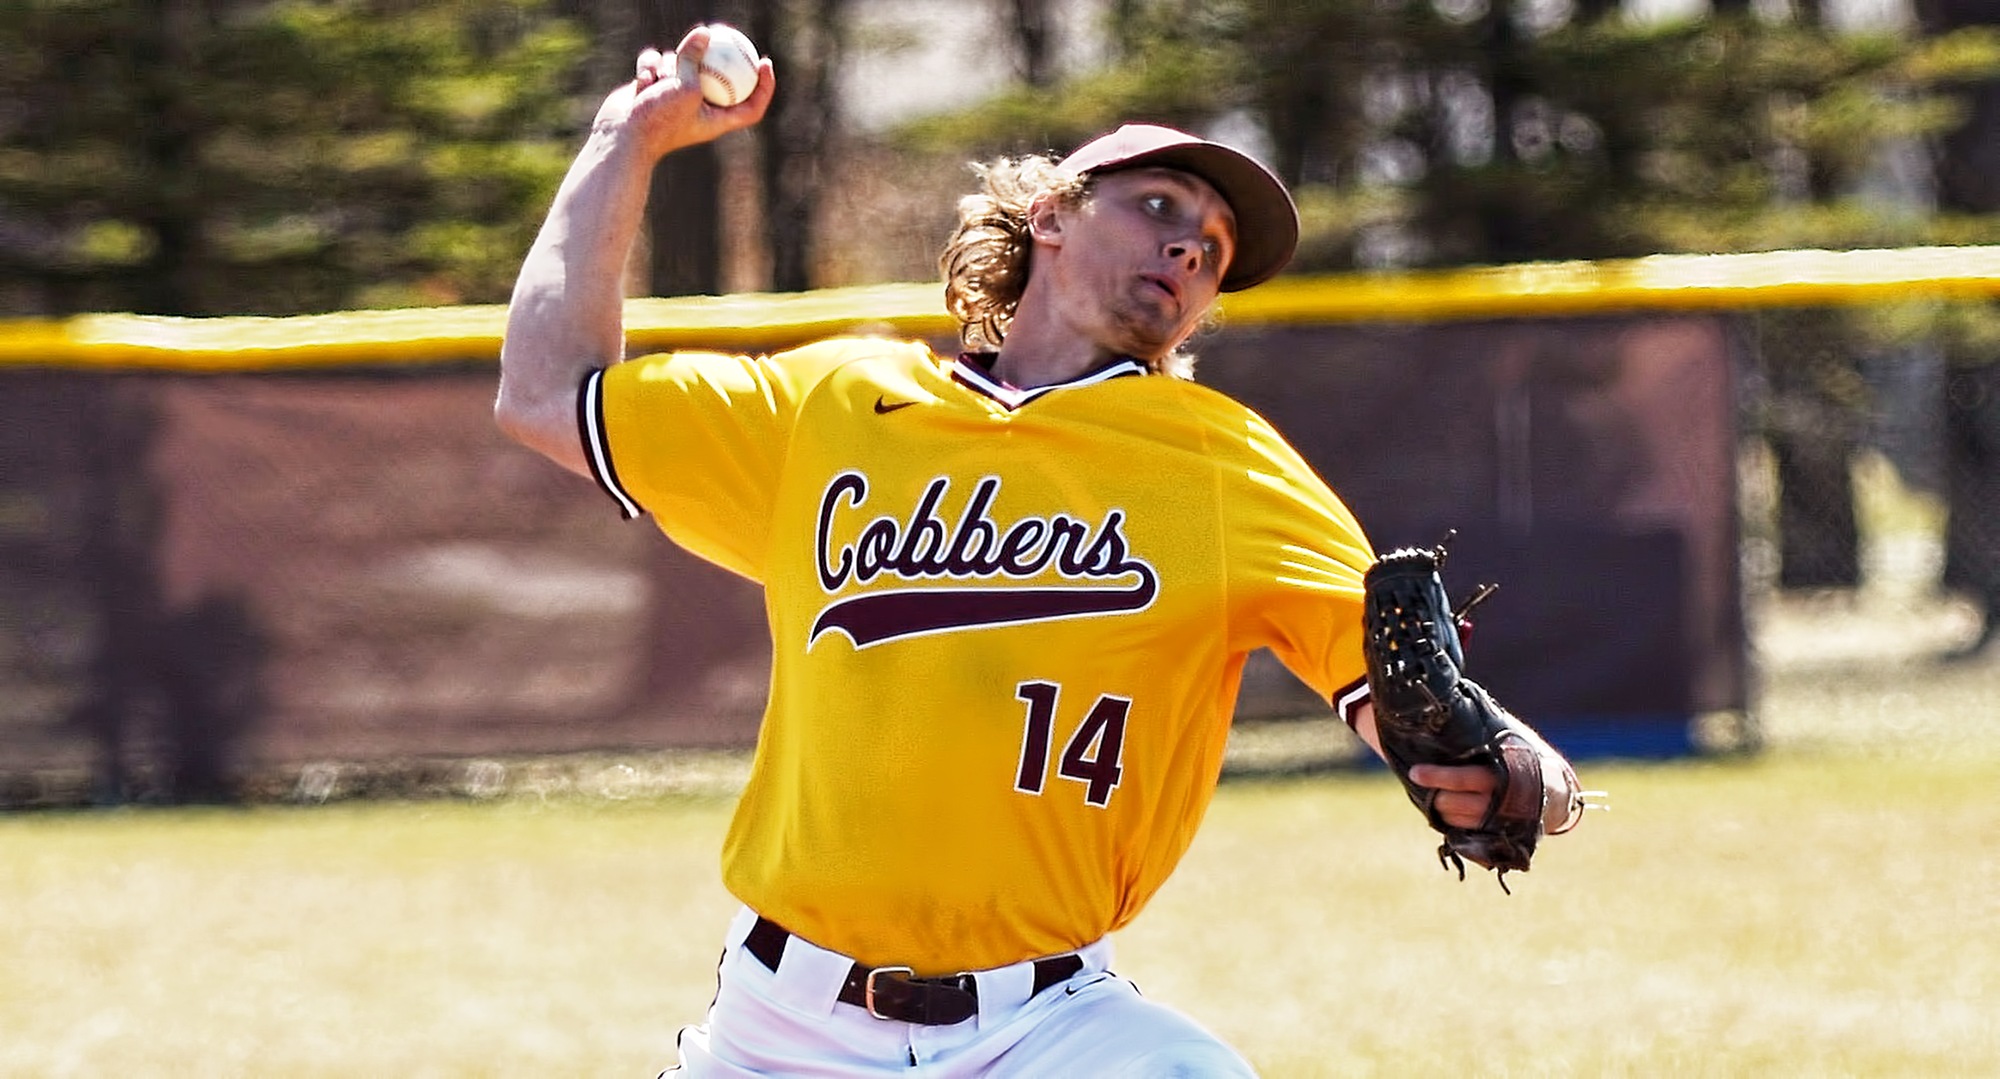 Junior pitcher Austin Ver Steeg pitched six innings and didn't allow and earned run in the Cobbers' game with Cornell.